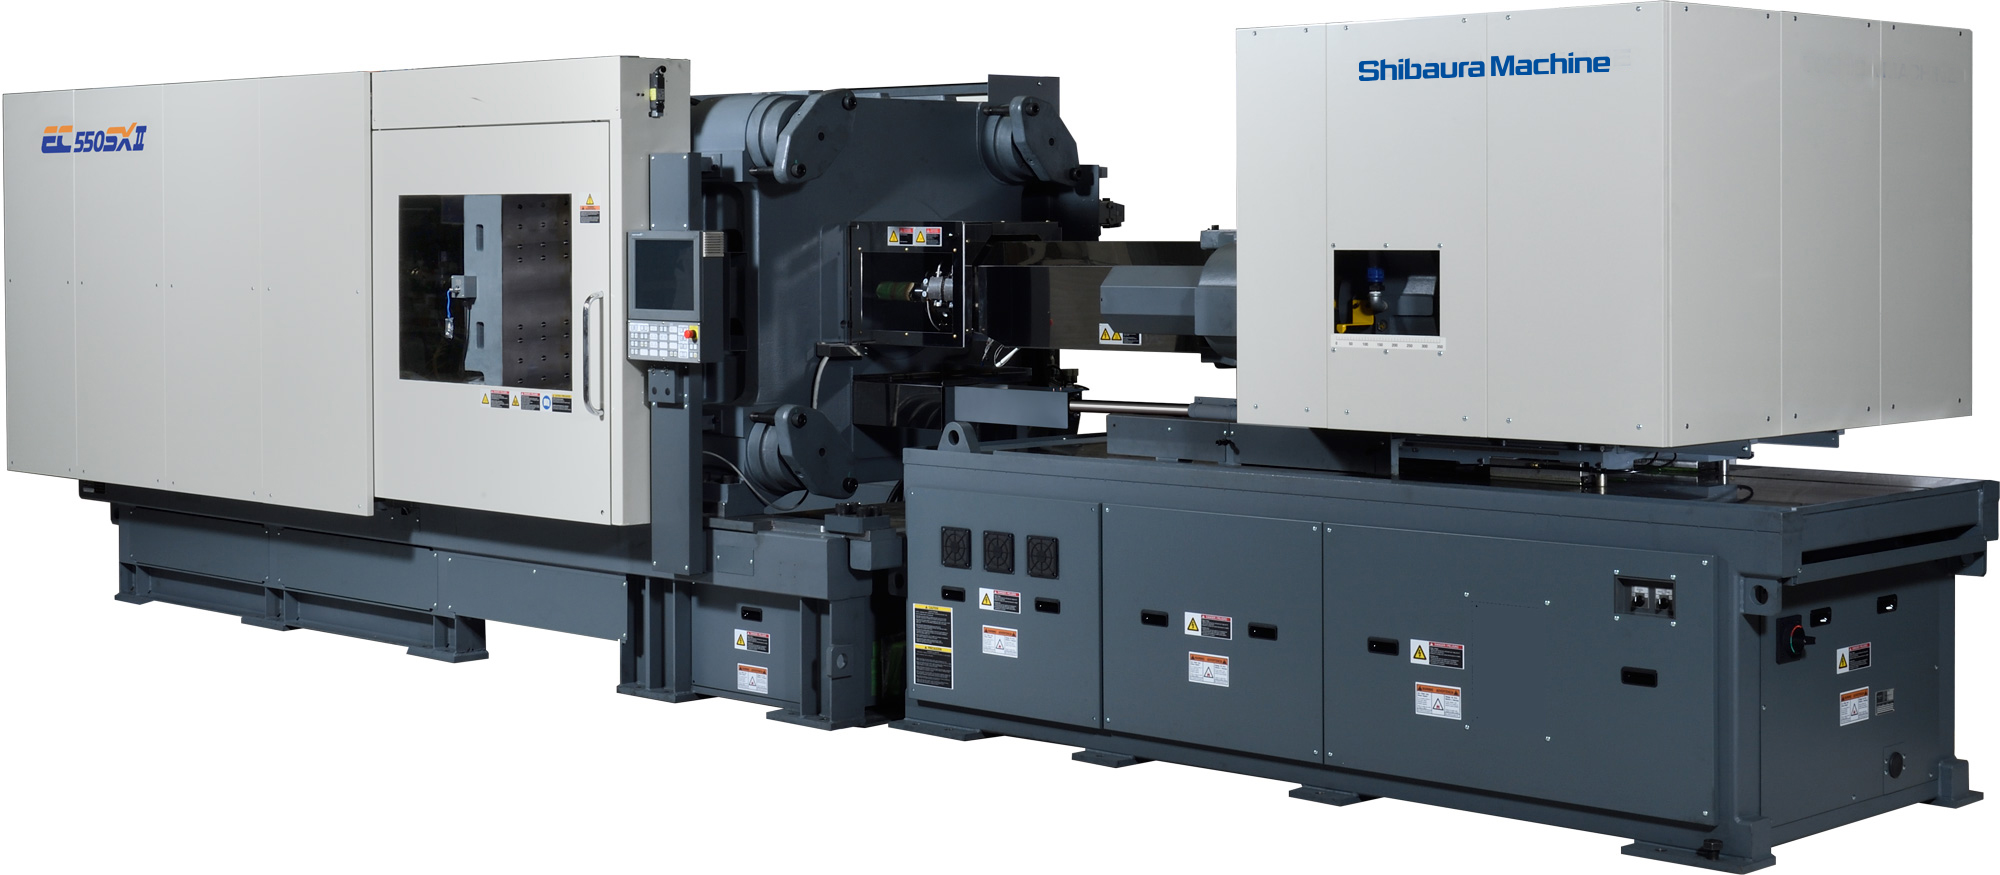 A 2020 Guide to Electric Plastic Injection Molding Machine